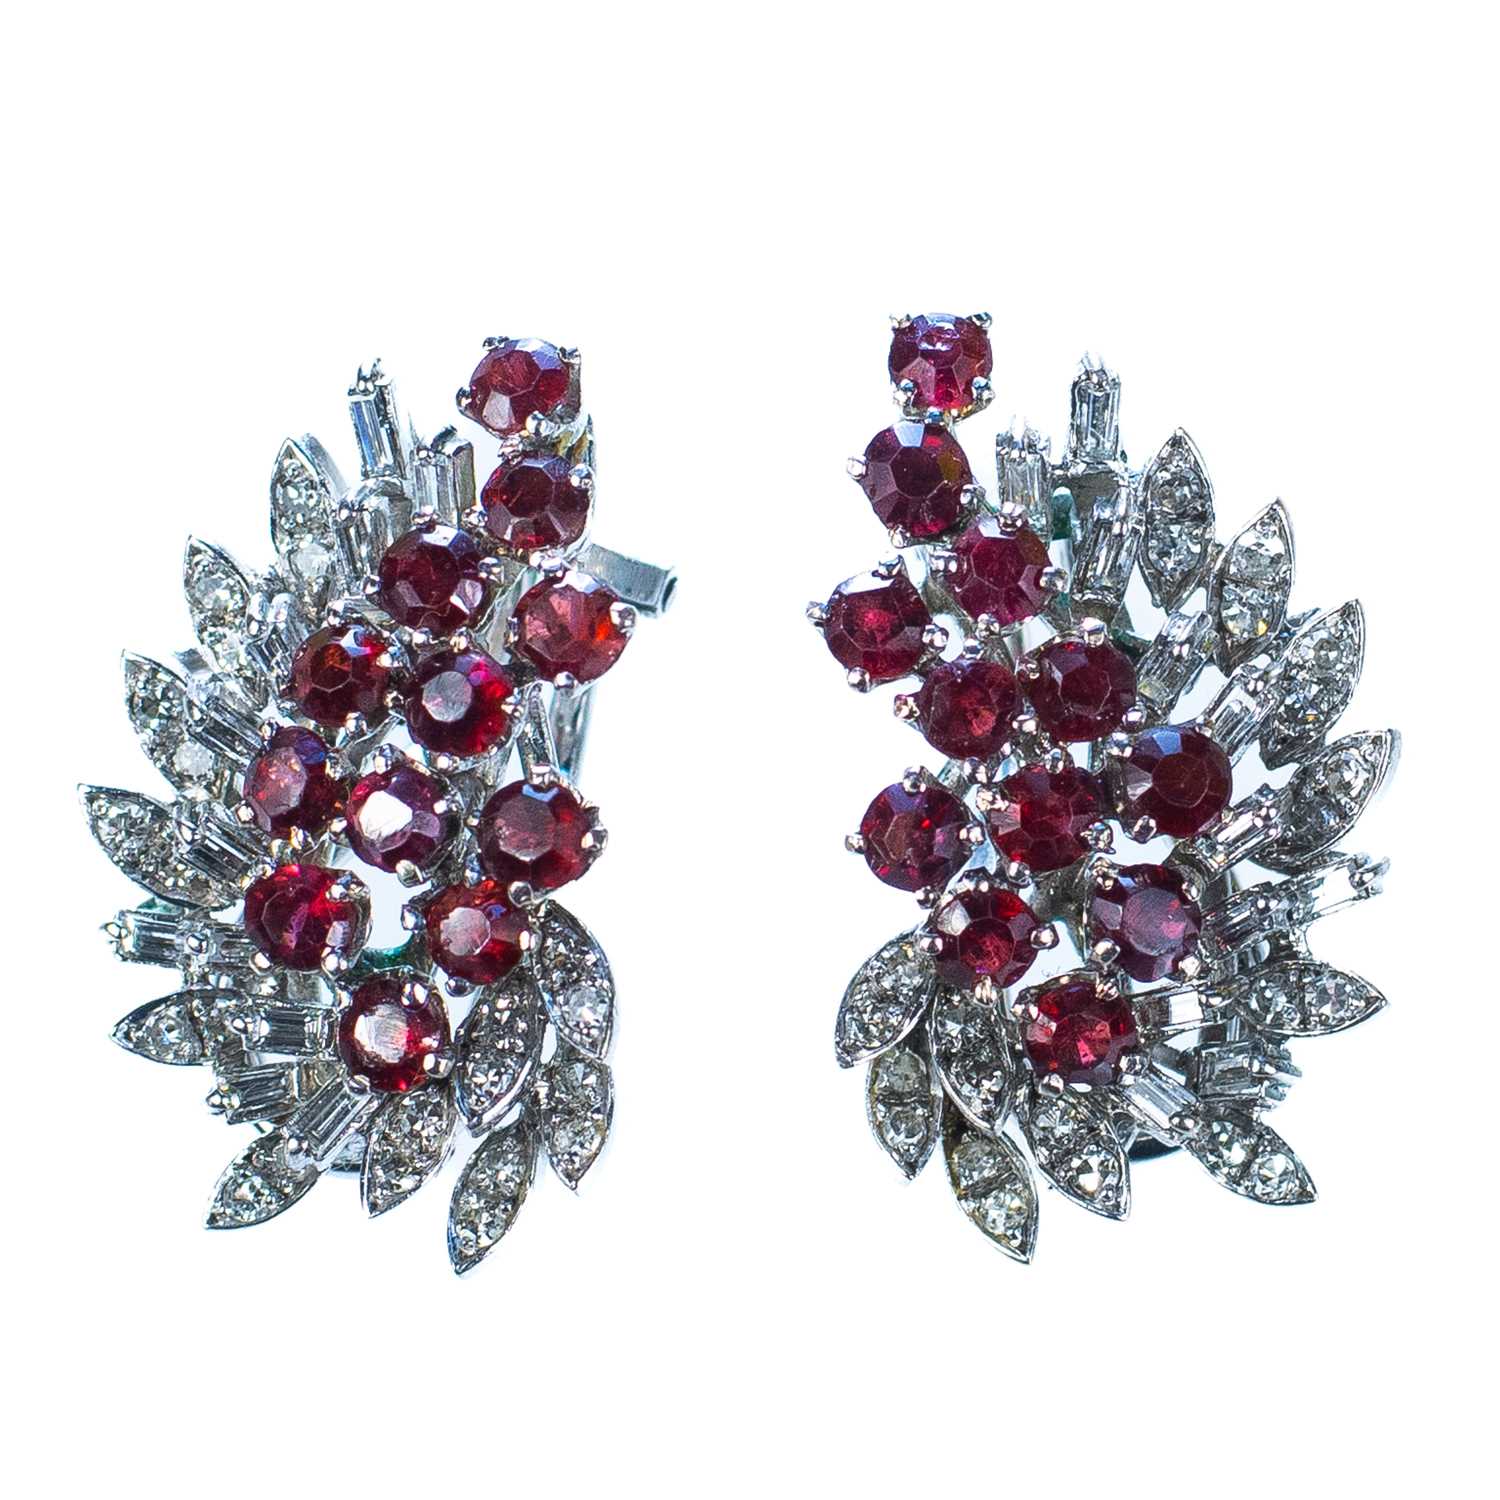 An attractive pair of white gold diamond and ruby clip earrings.